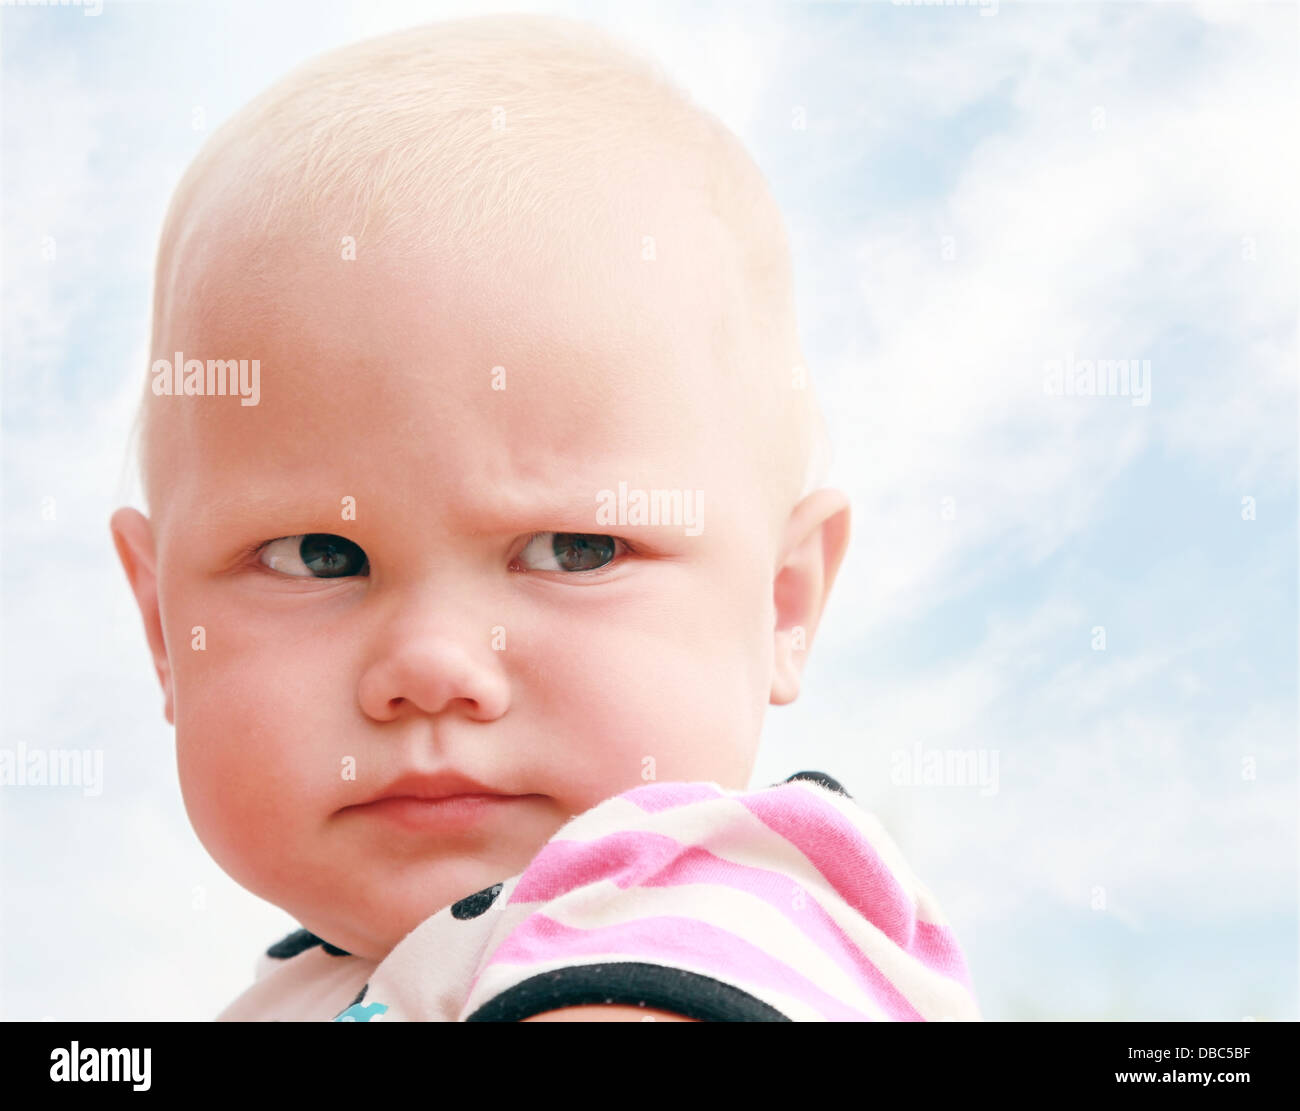 Funny baby girl outdoor summer close up portrait above cloudy sky Stock Photo